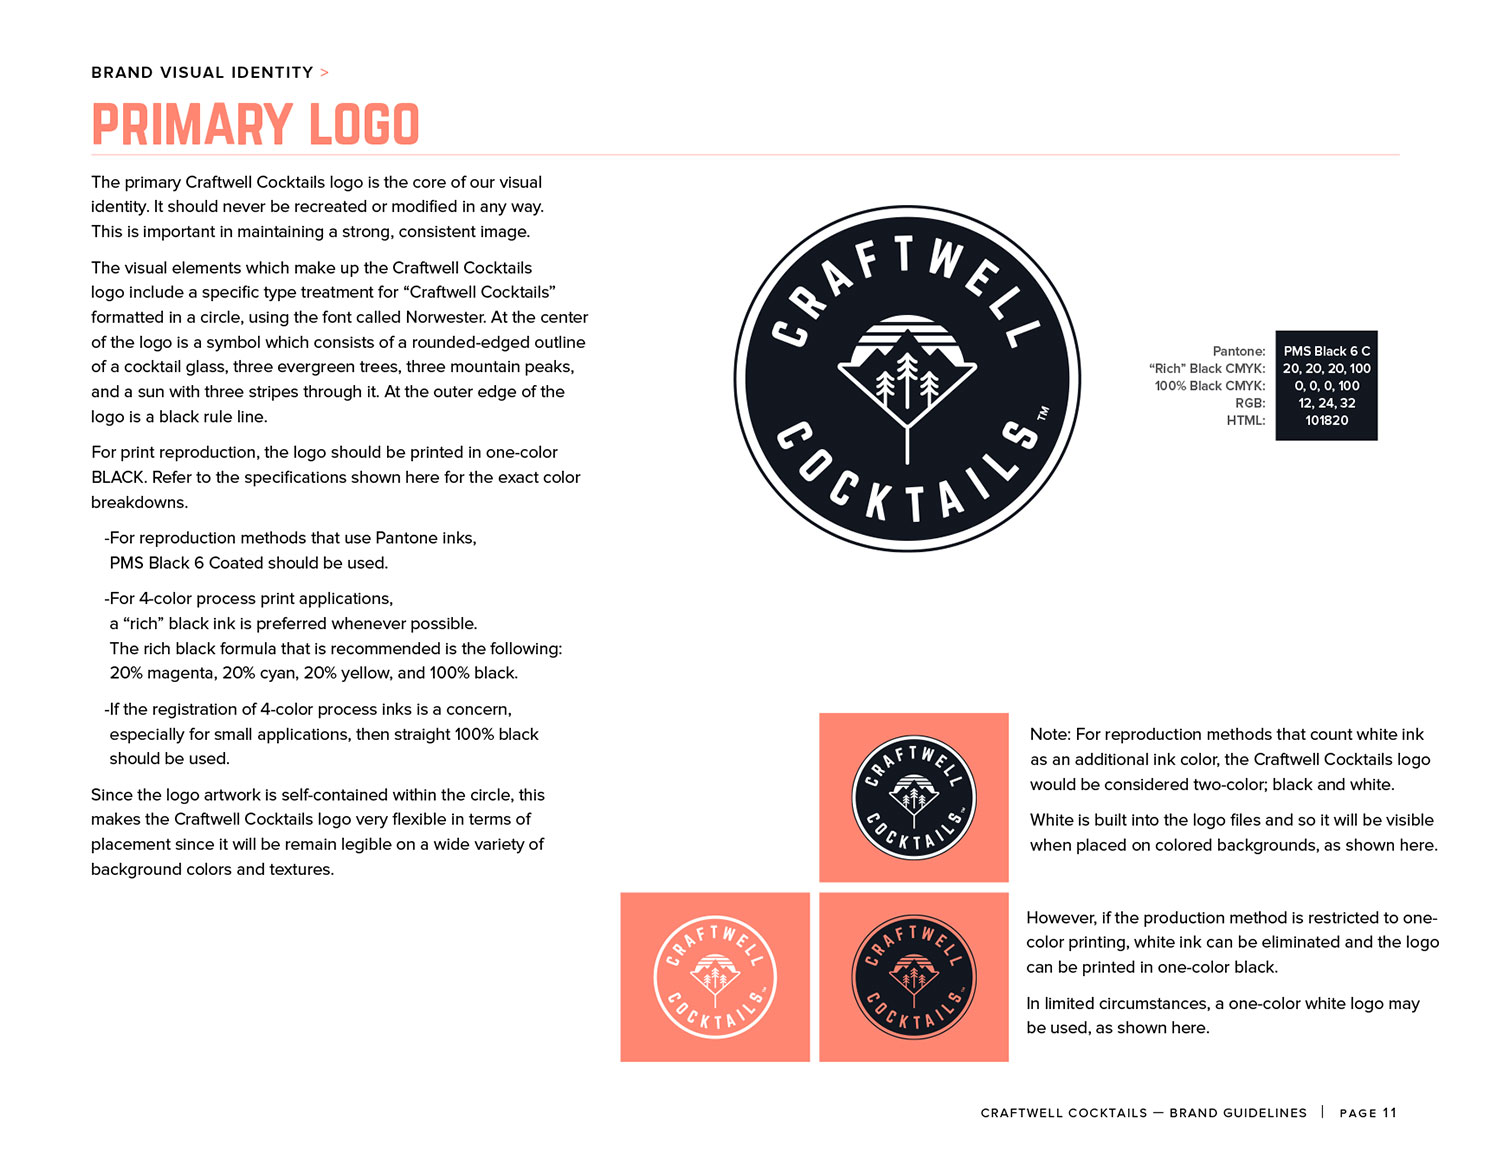 Craftwell Cocktails brand guidelines primary logo